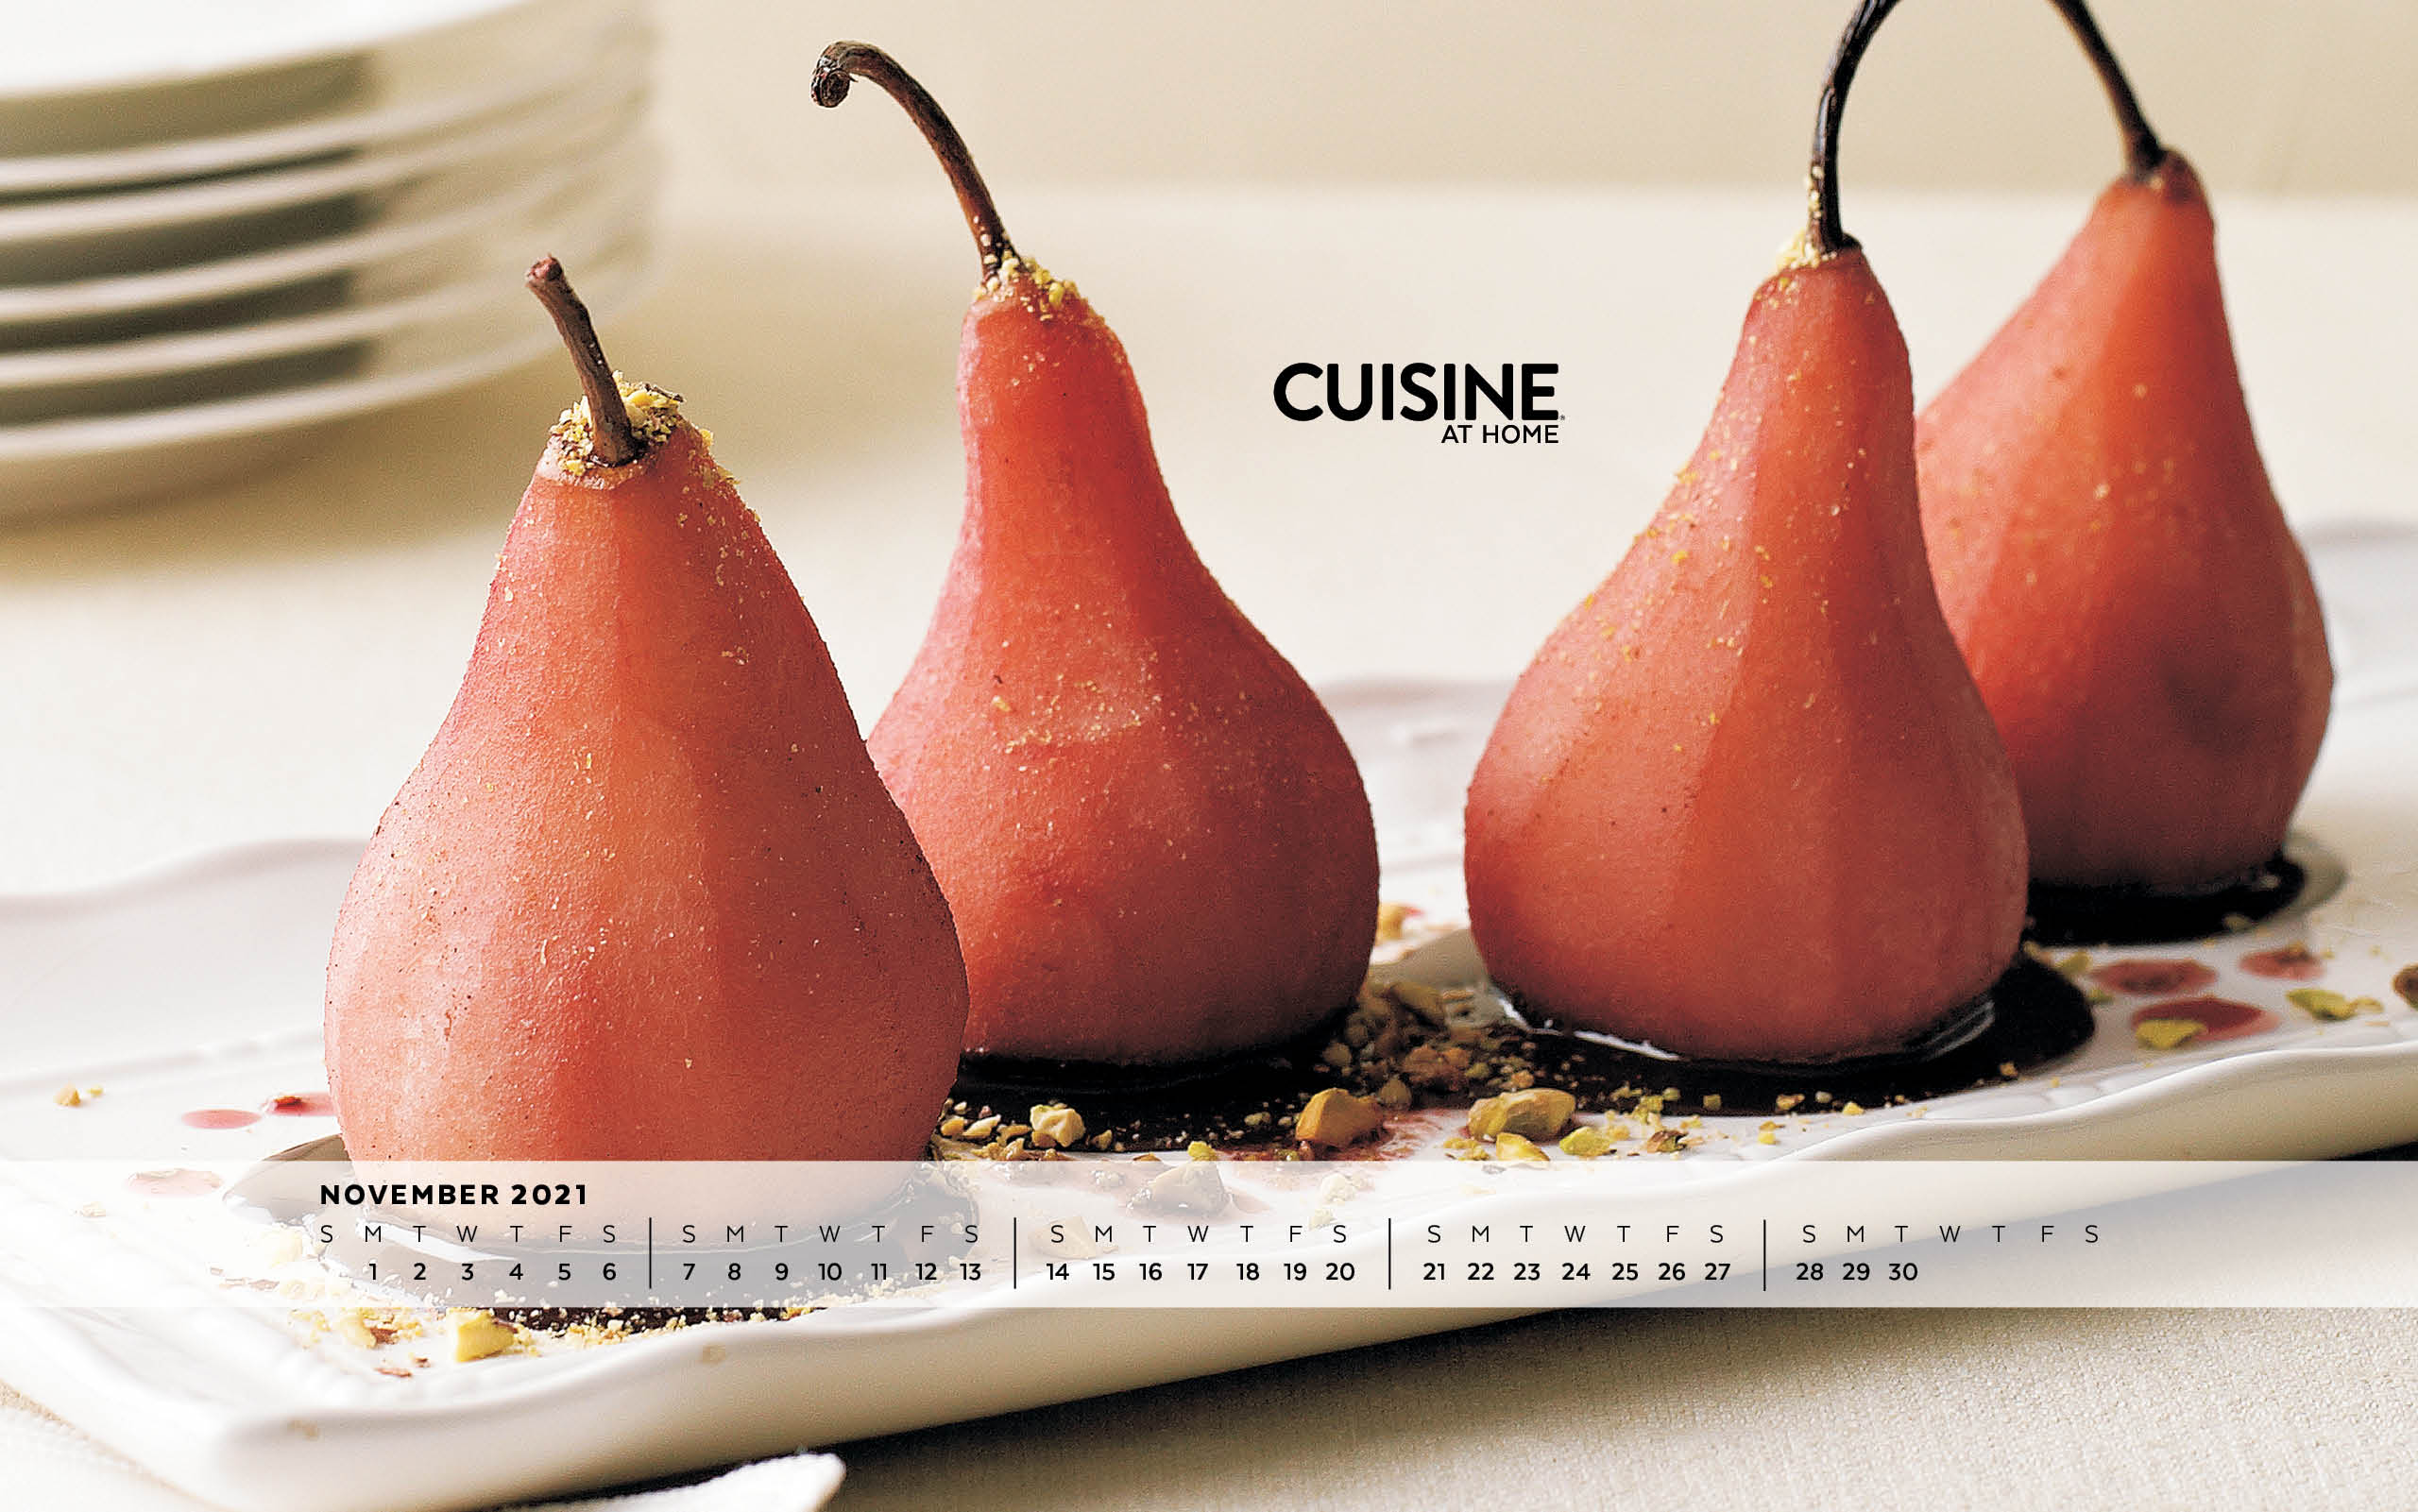 Free Desktop Wallpaper with calendar - November 2021 - Cuisine at Home - Autumn fall holiday Thanksgiving aesthetic food cooking treats dessert homemade poached pears - Windows Apple